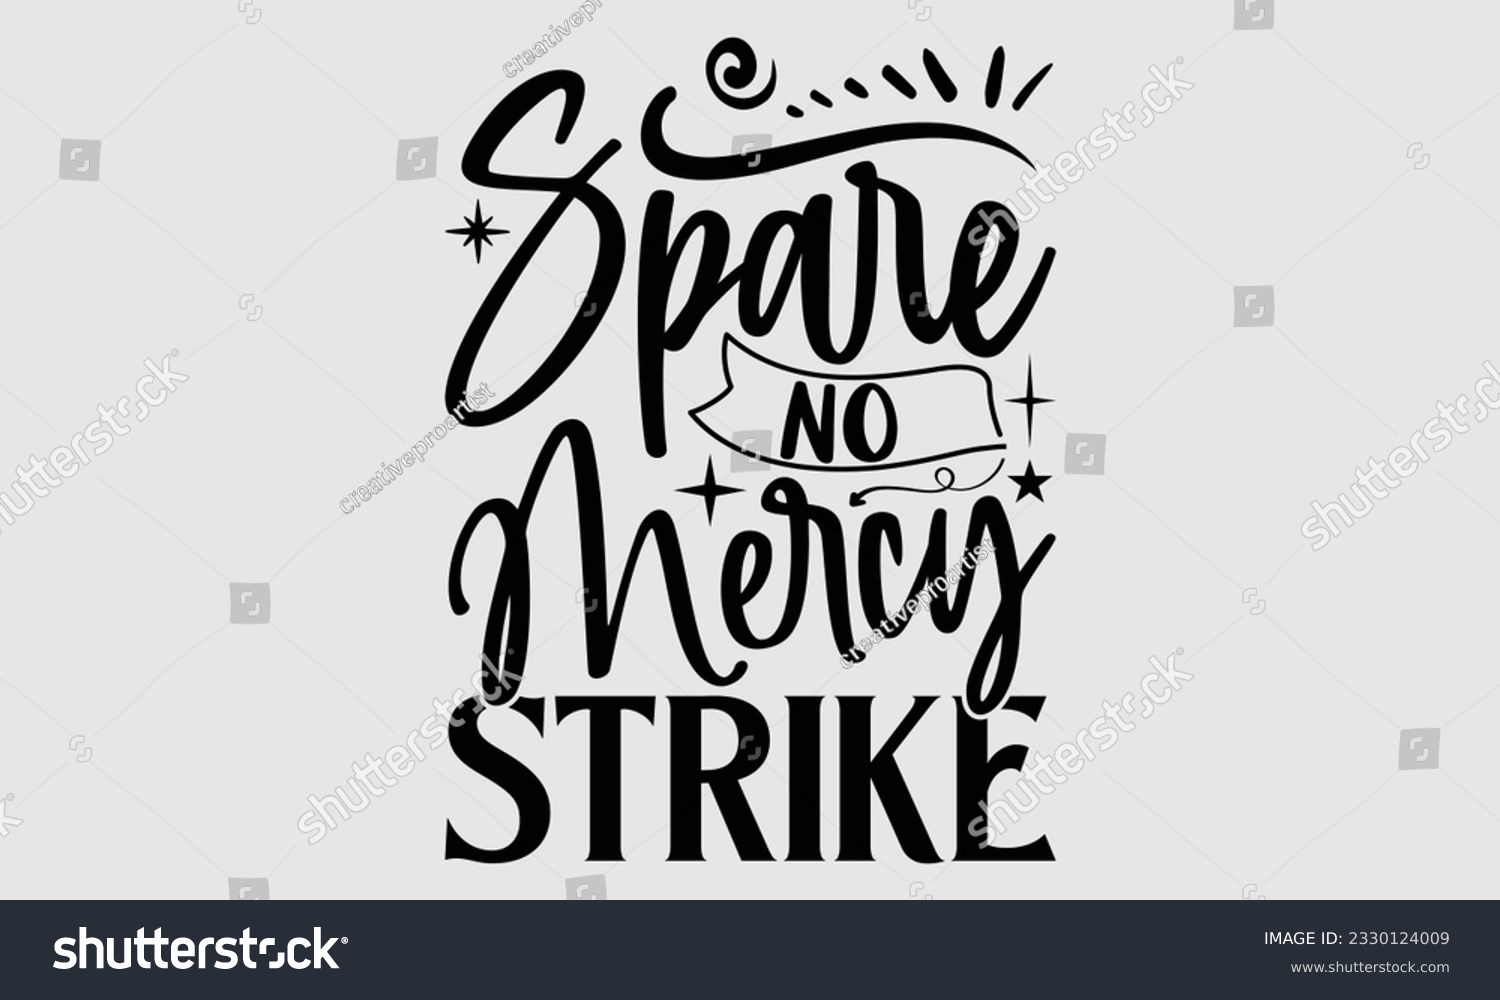 SVG of Spare No Mercy Strike- Bowling t-shirt design, Illustration for prints on SVG and bags, posters, cards, greeting card template with typography text EPS svg